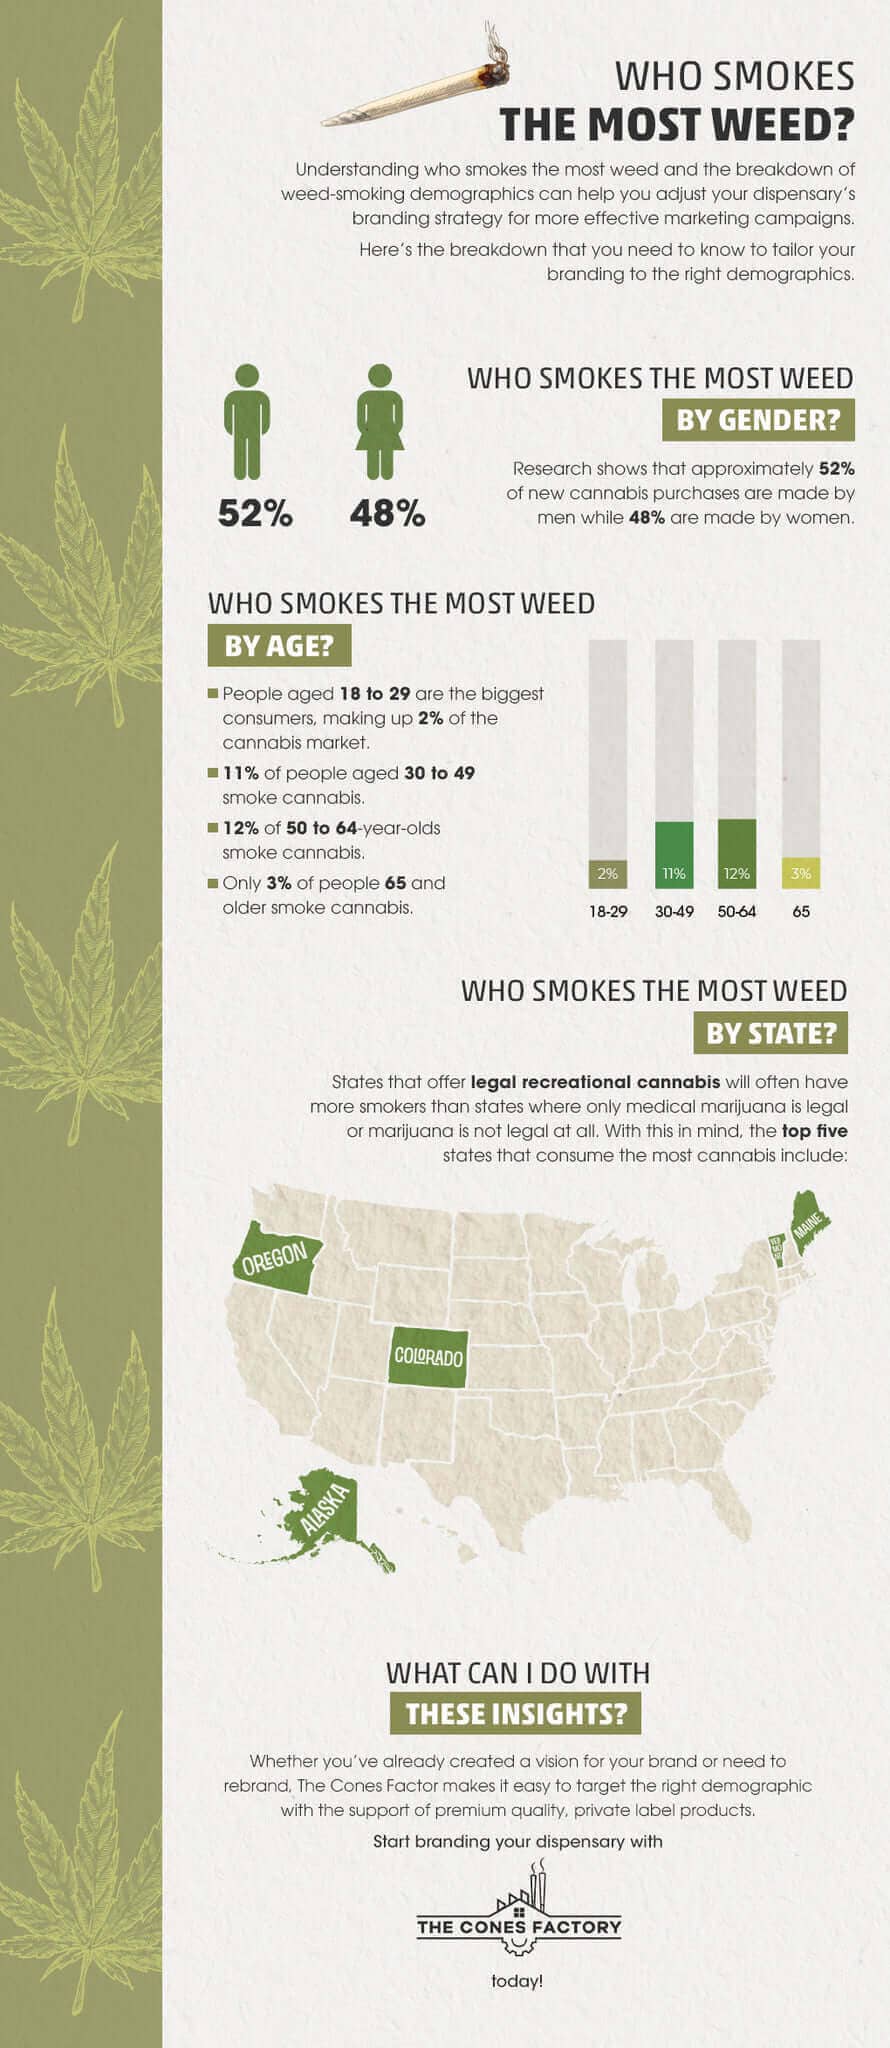 Who Smokes the Most Weed